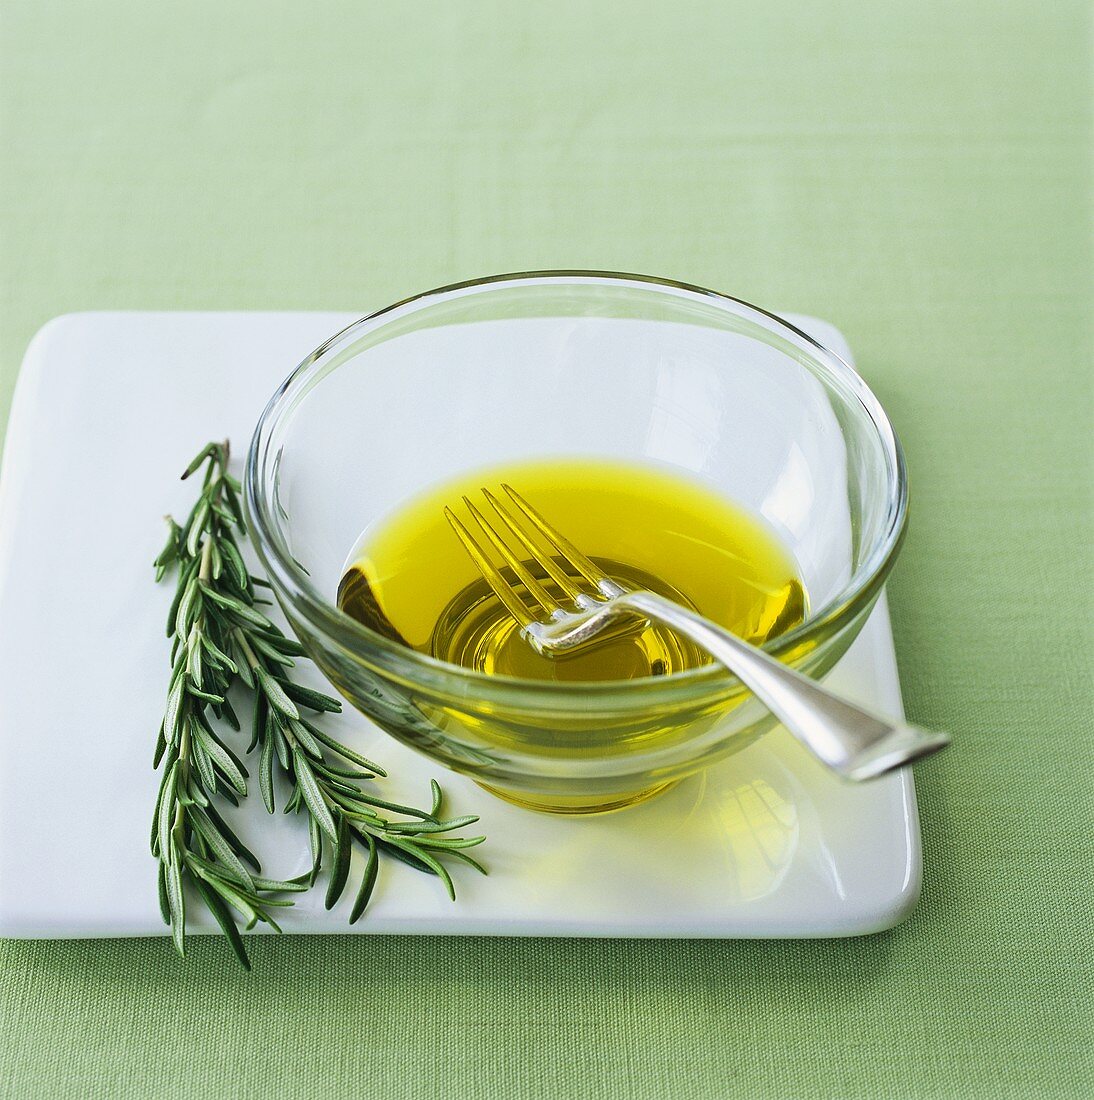 Olive oil in small glass bowl with fork, rosemary beside it